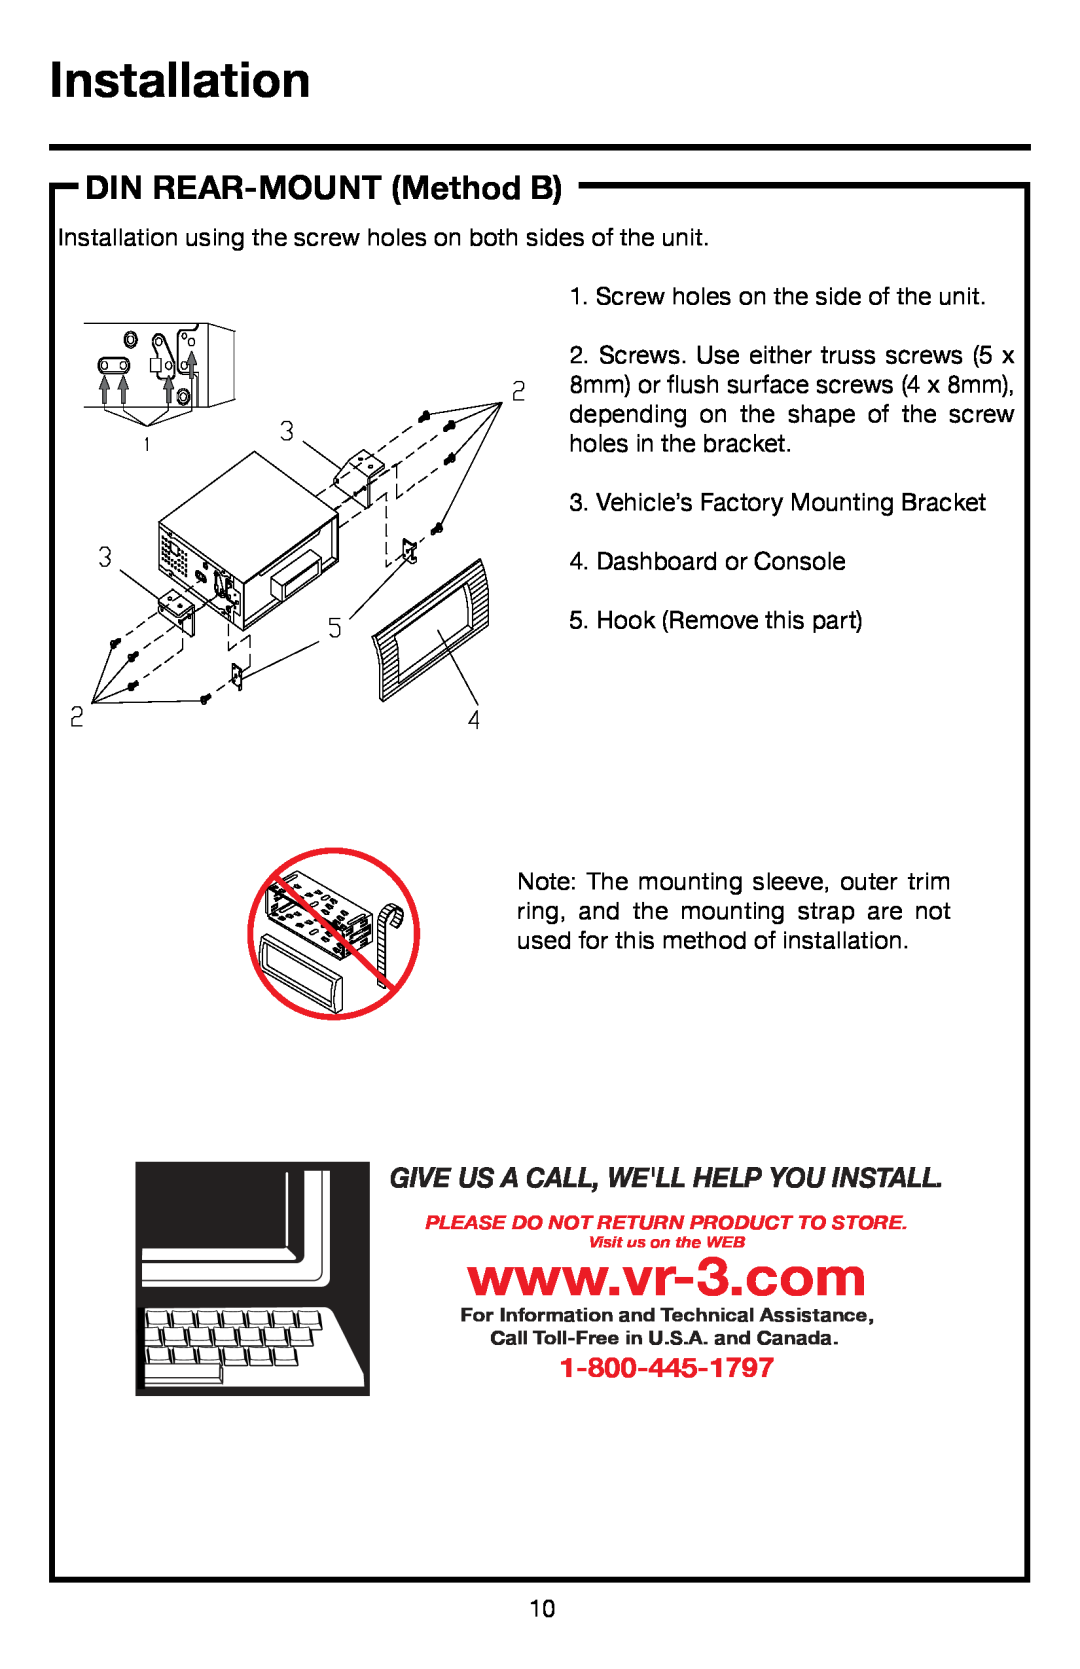 Roadmaster VRVD630 manual DIN REAR-MOUNTMethod B, Installation, Give Us A Call, Well Help You Install 